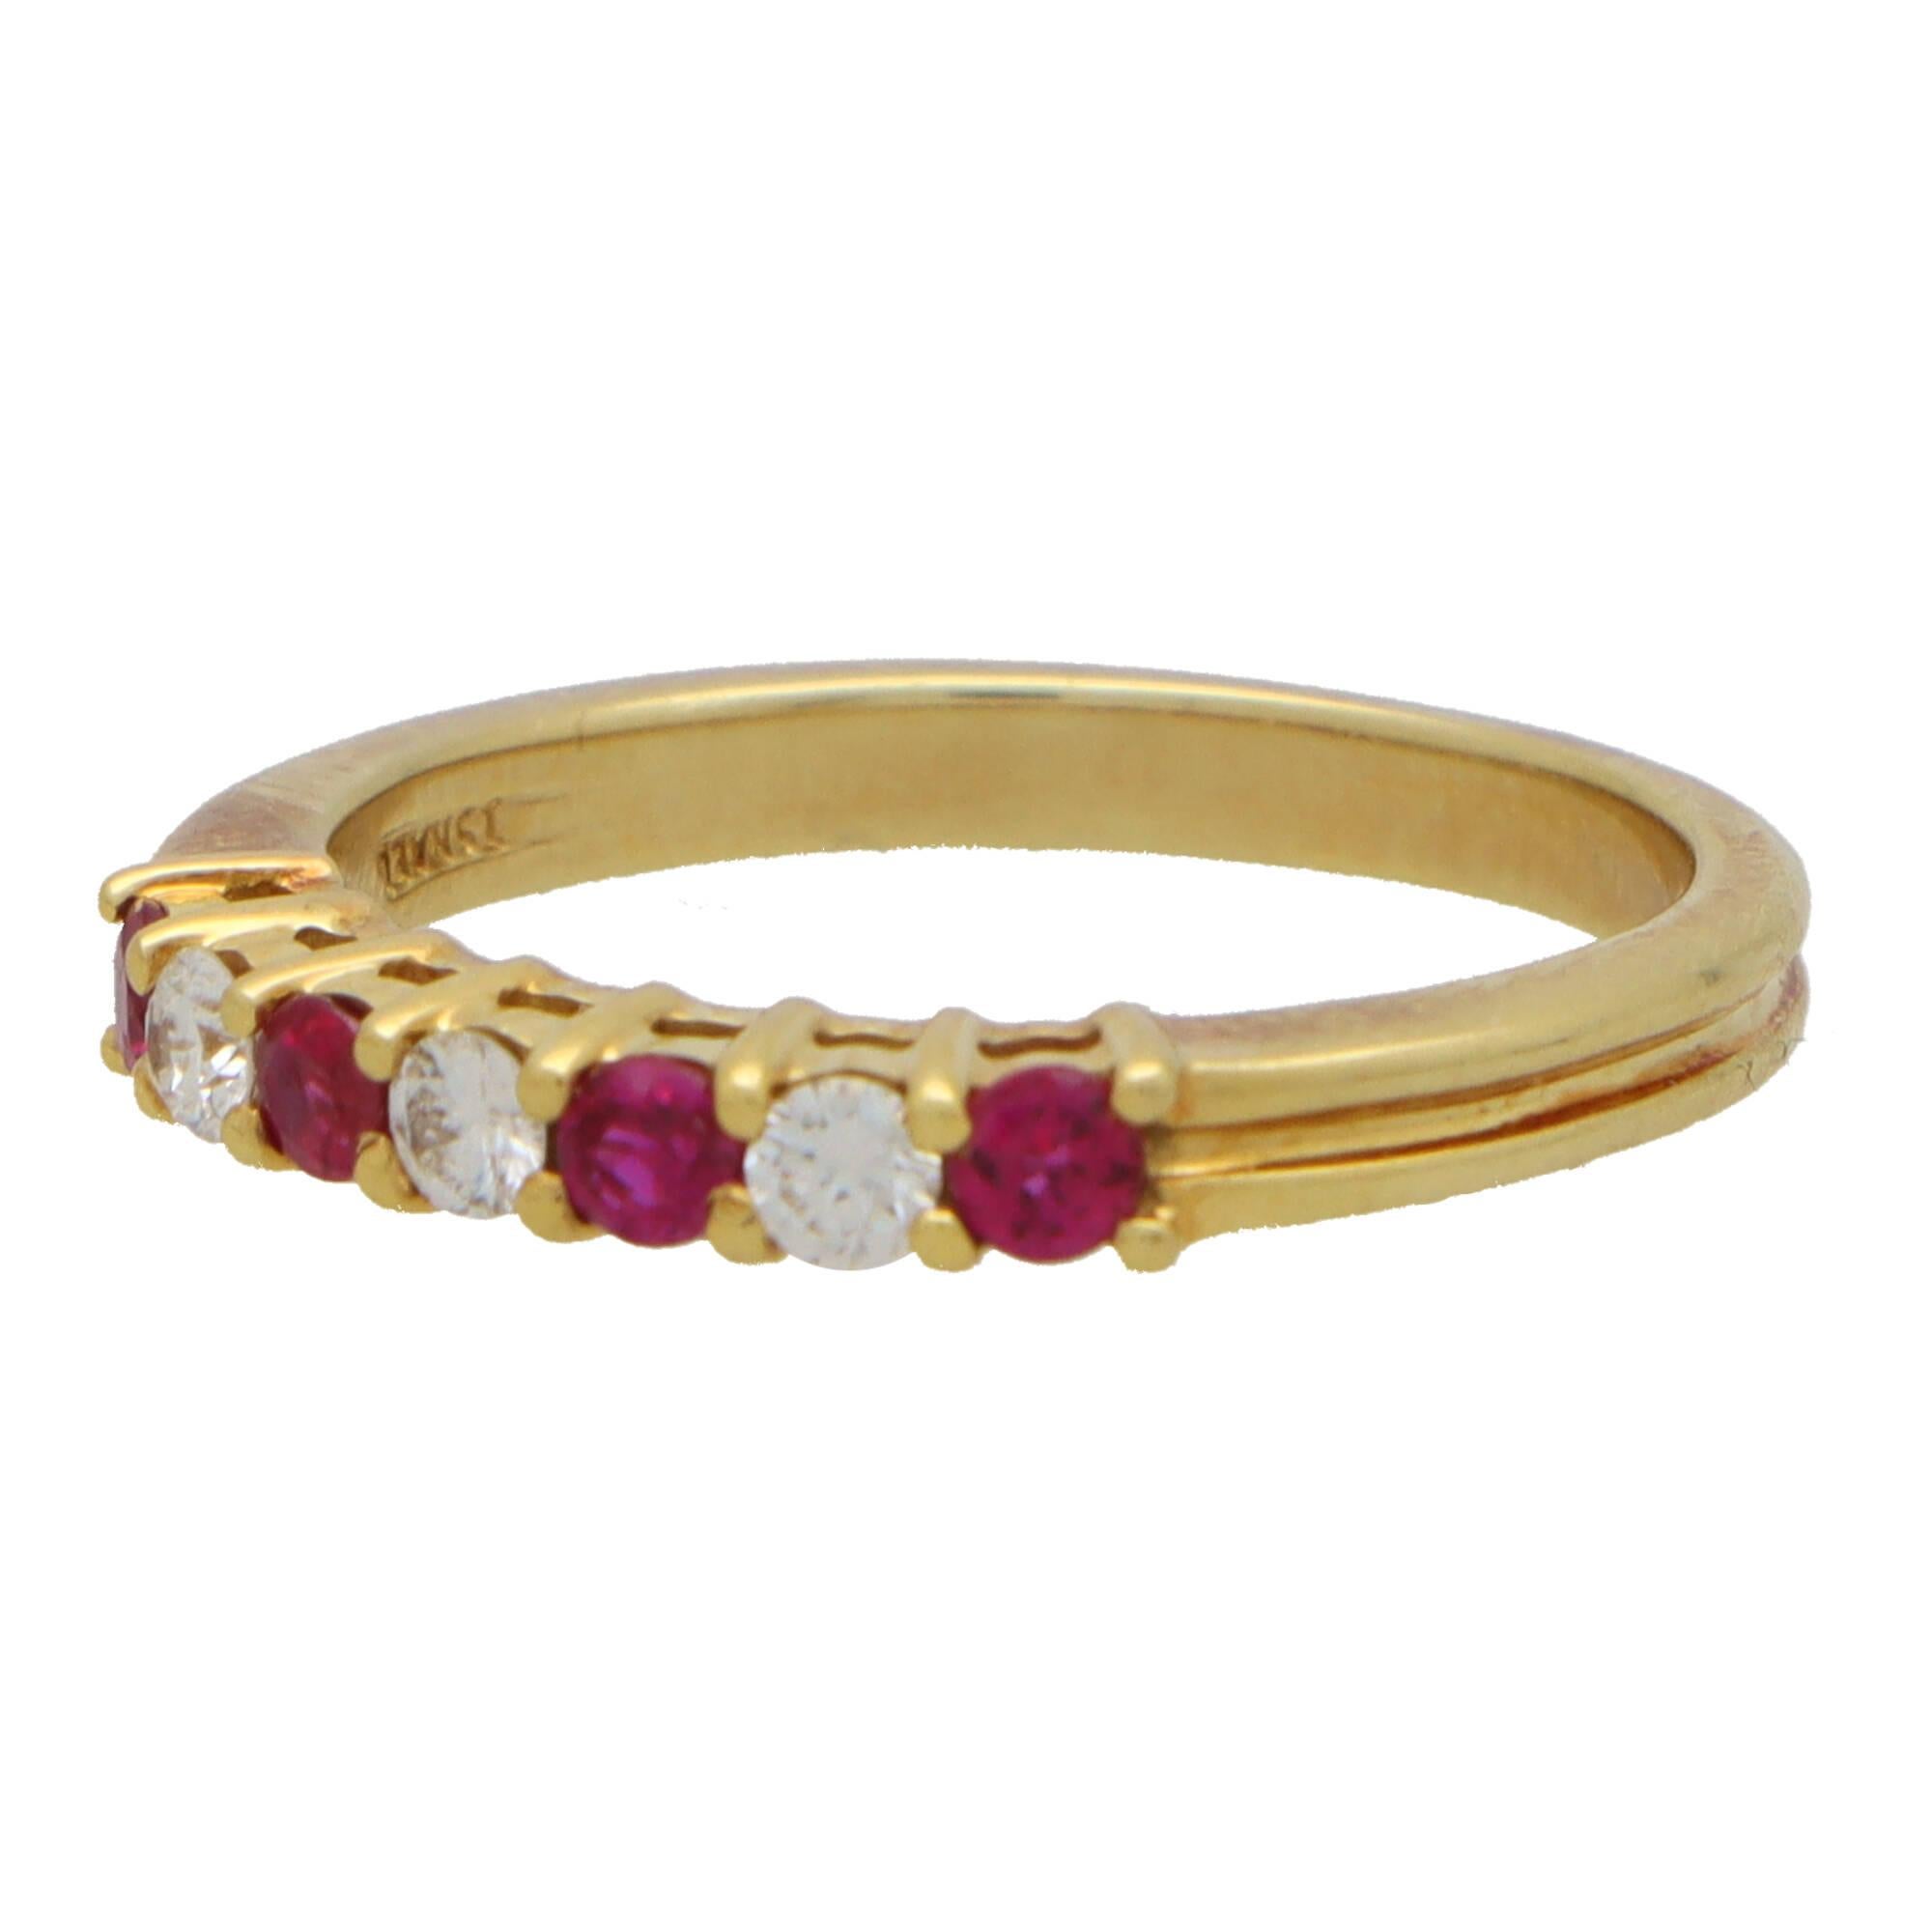 A beautiful vintage Tiffany & Co. diamond and ruby half eternity ring set in 18k yellow gold.

The ring is composed of 7 round cut stones altogether, four of which being rubies and three diamonds. All the stones are securely claw set within a